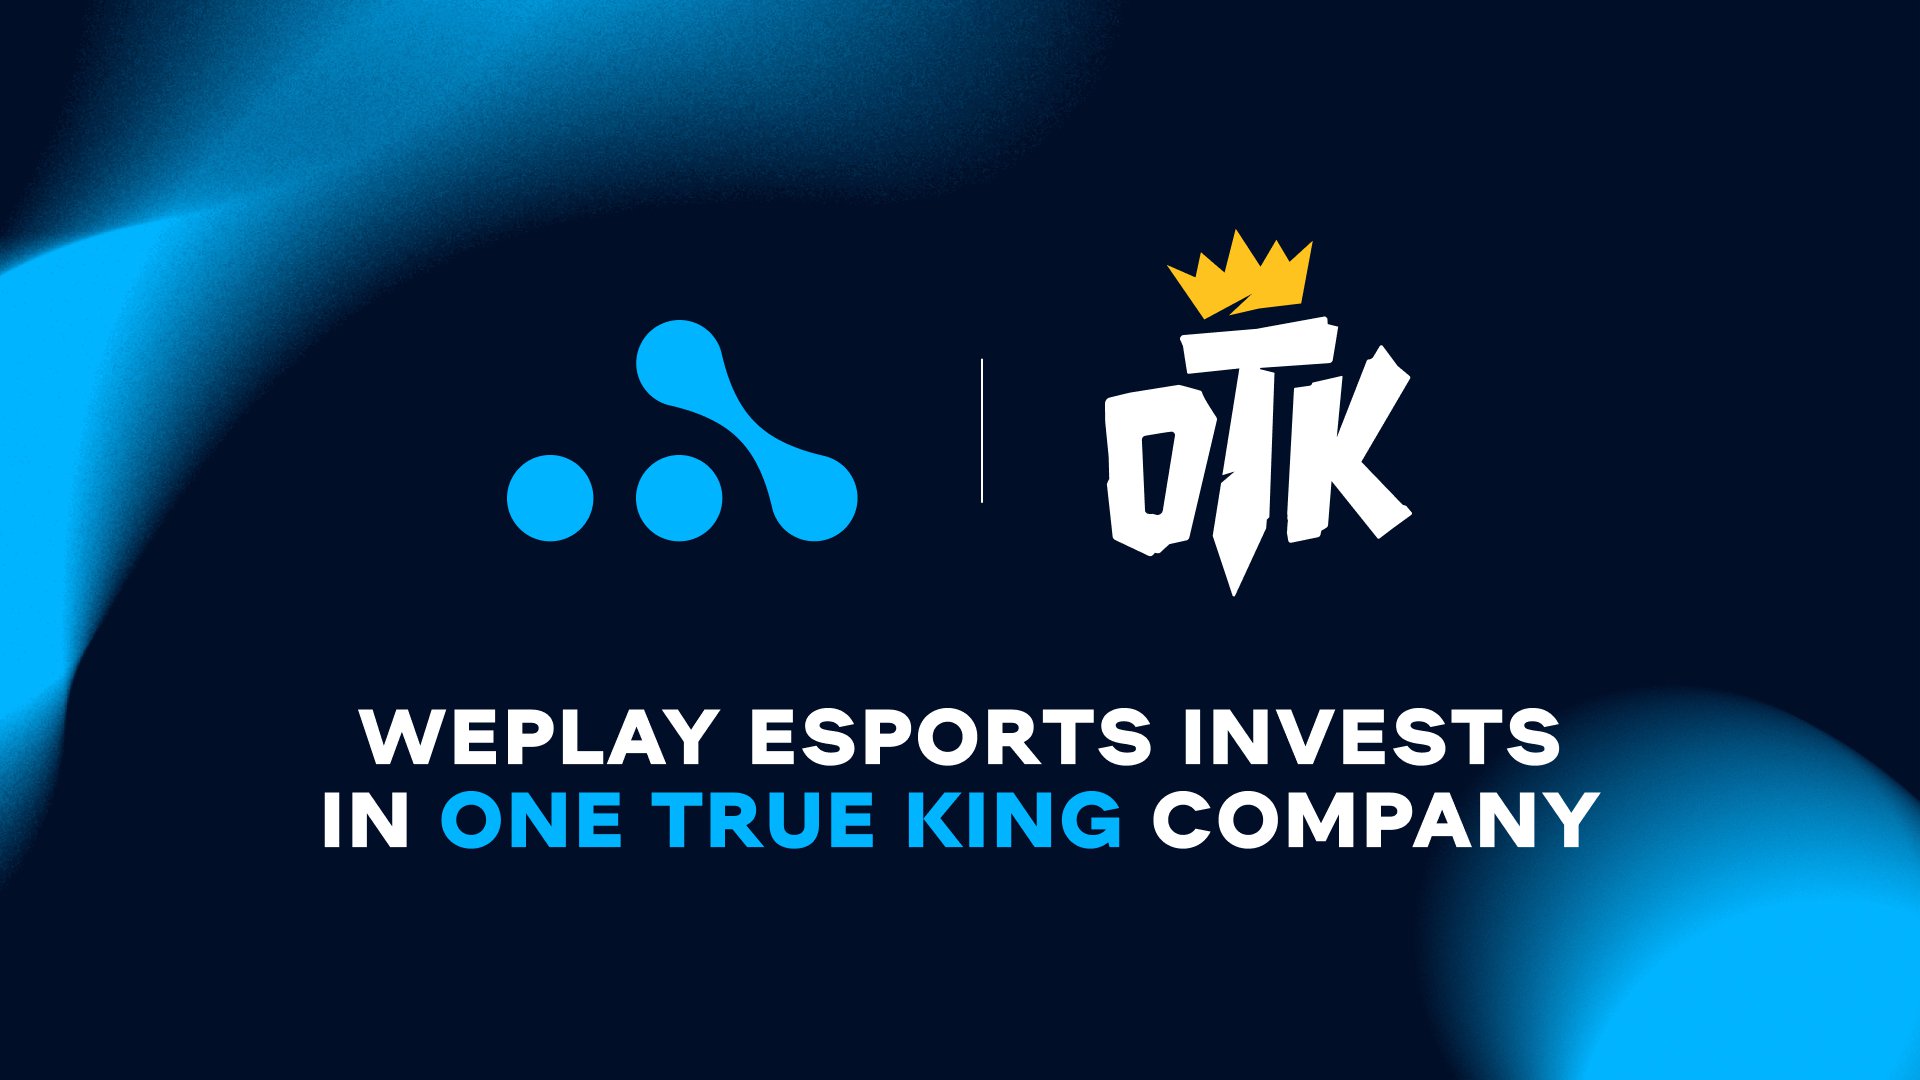 WePlay Esports invests in One True King company. Image: WePlay Holding